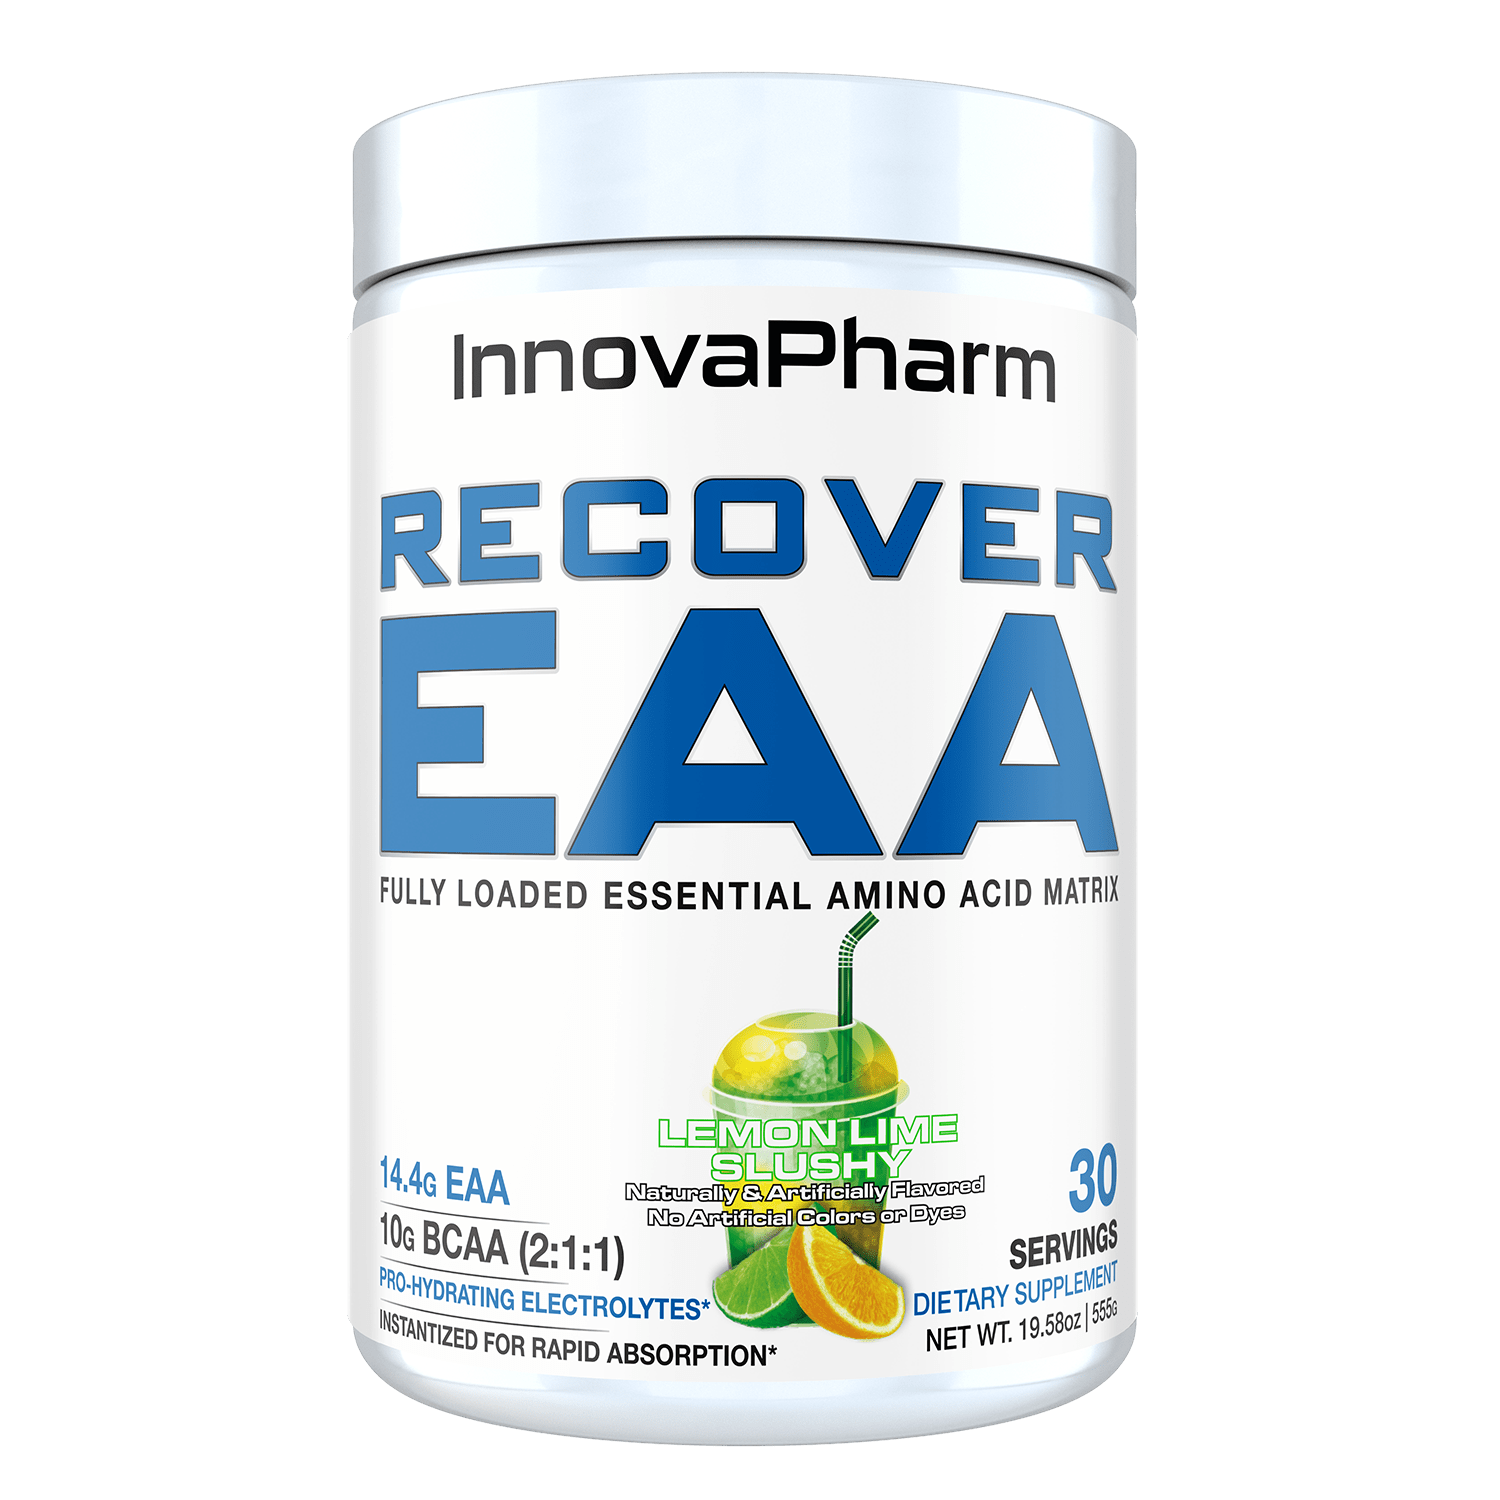 Recover EAA 555g (30 Servings)